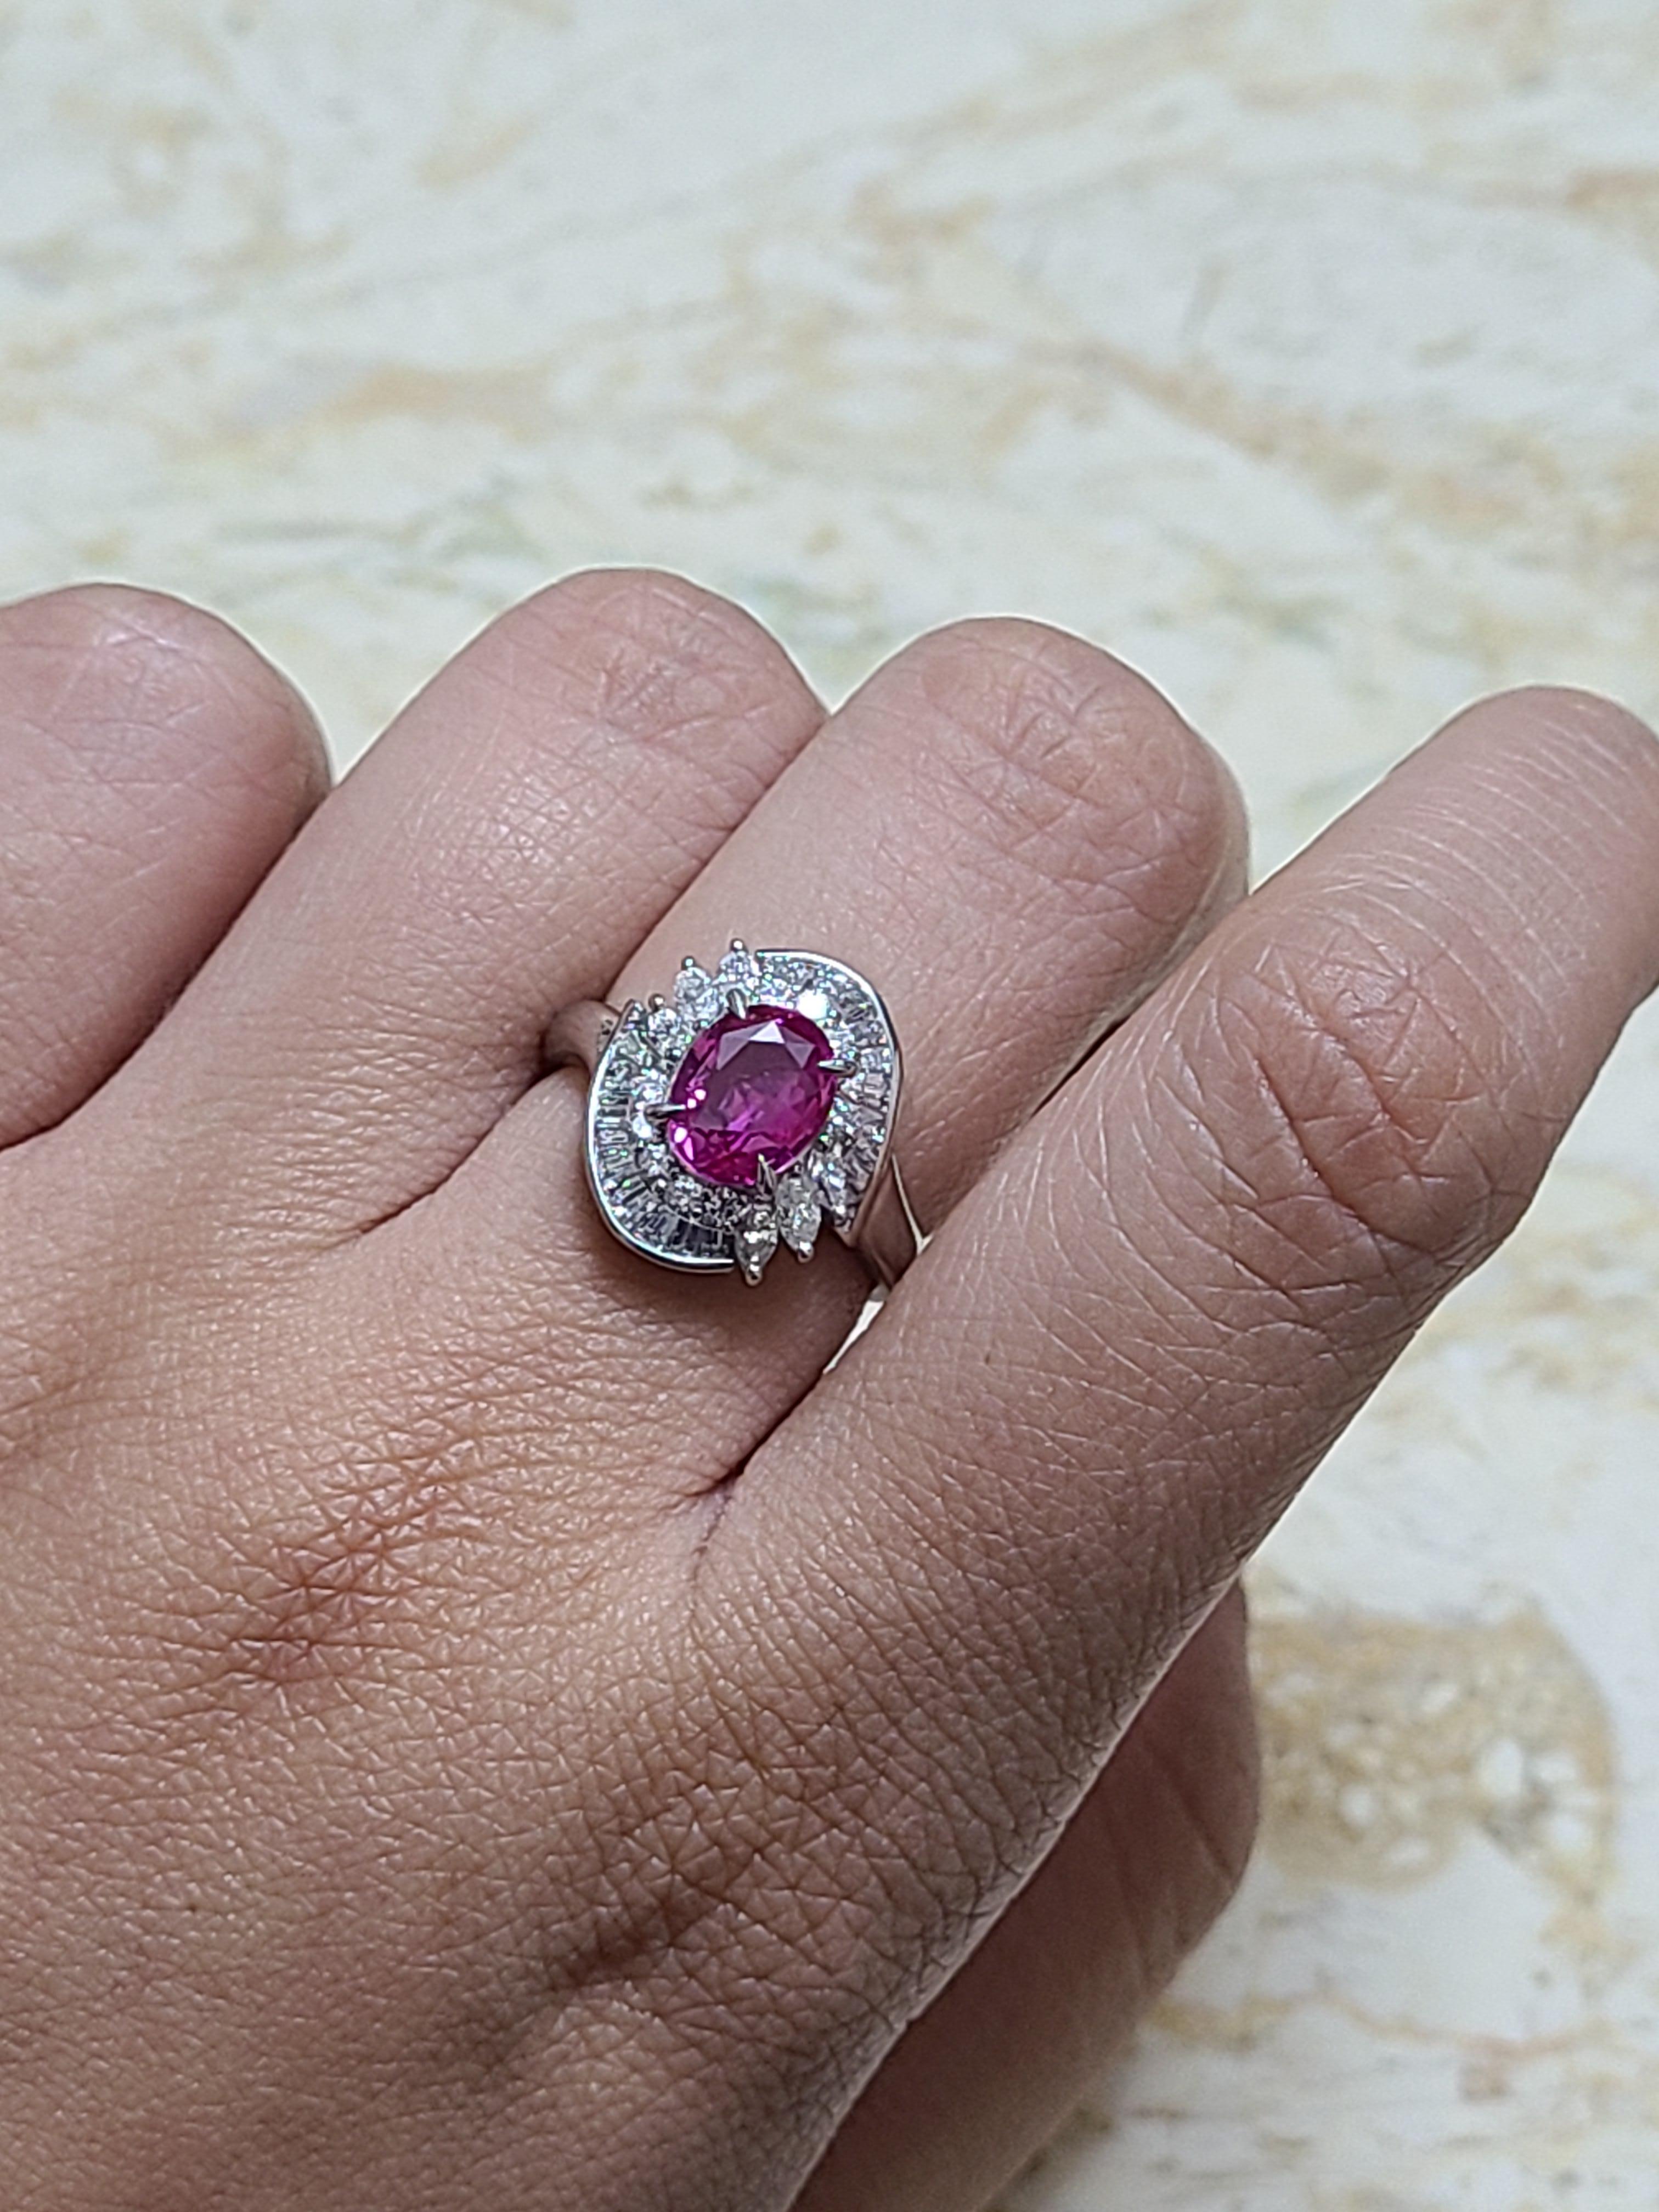 A gorgeous and elegant pink sapphire ring set in platinum PT900 with diamonds . The pink sapphire weight is 1.79 carats and Diamond weight is .96 carats . The ring dimensions in cm 1.5 x 1.3 x 2.2 (LXWXH). US size 6 1/4.